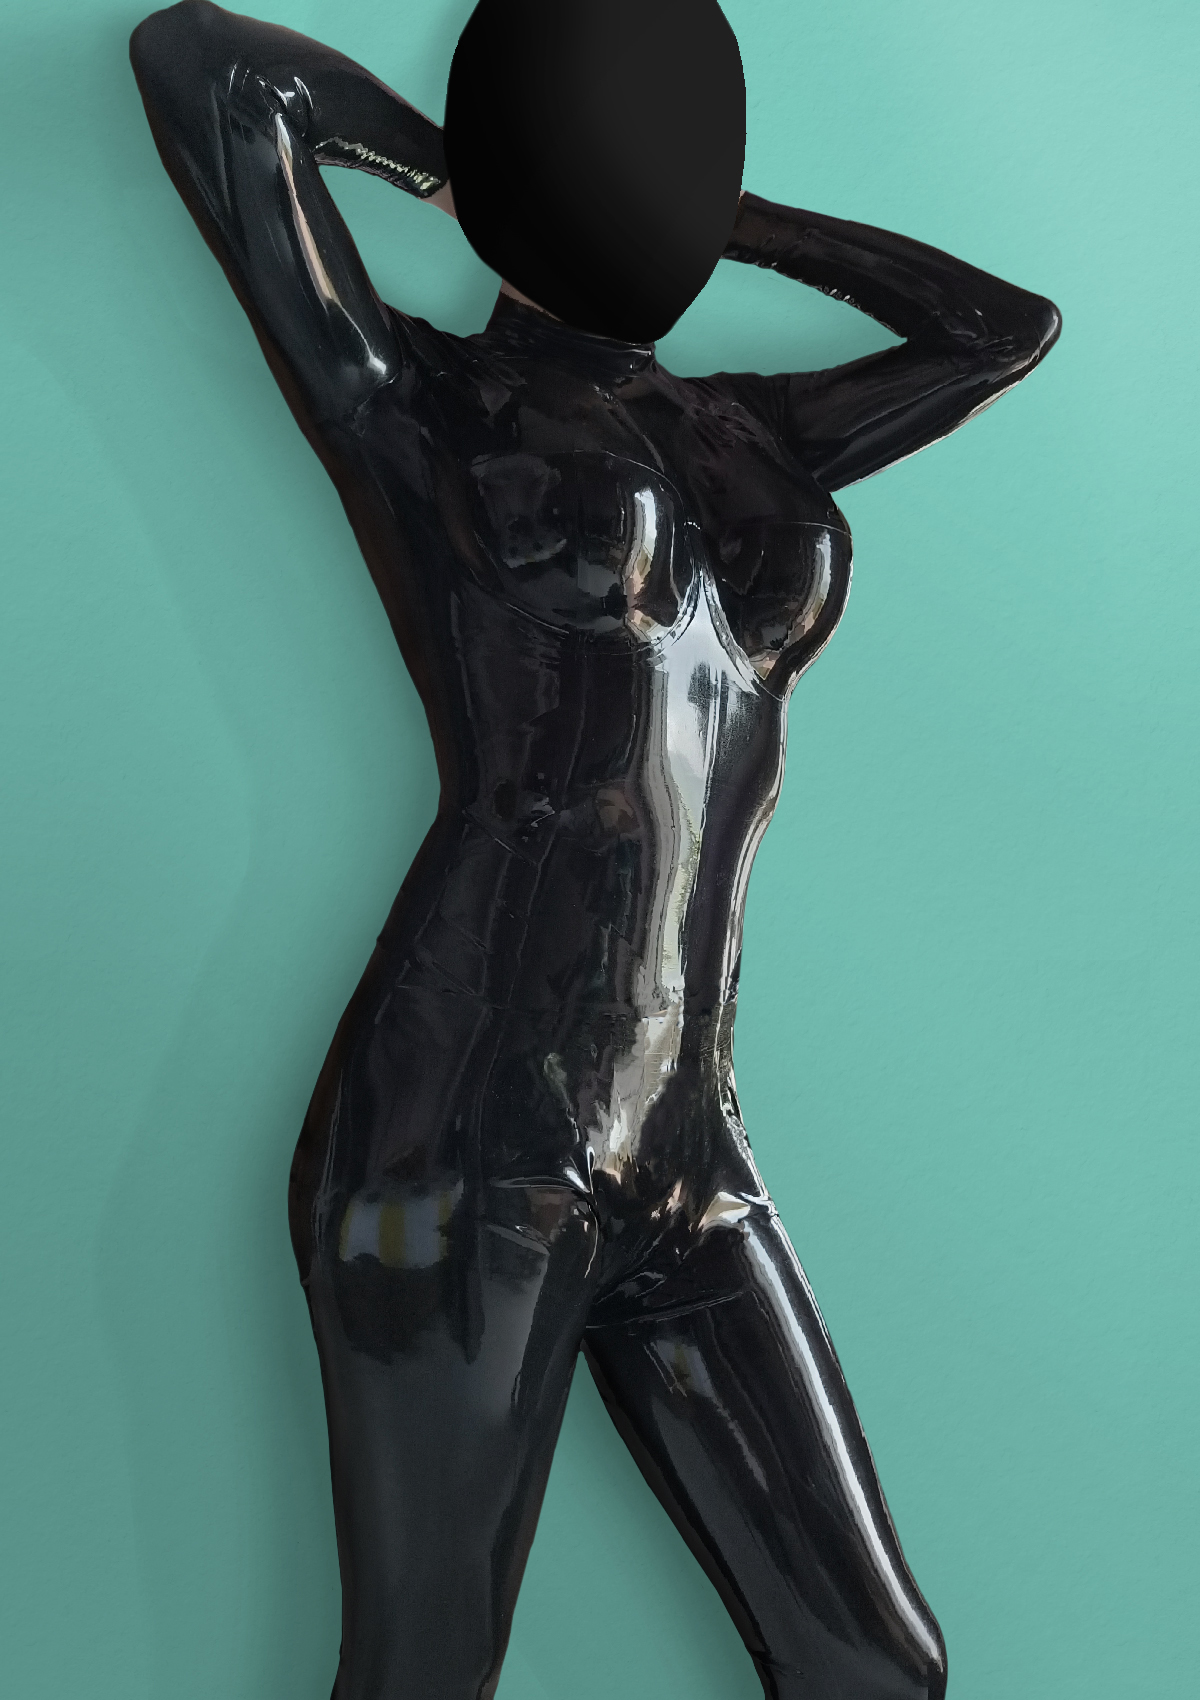 Latex doll suit